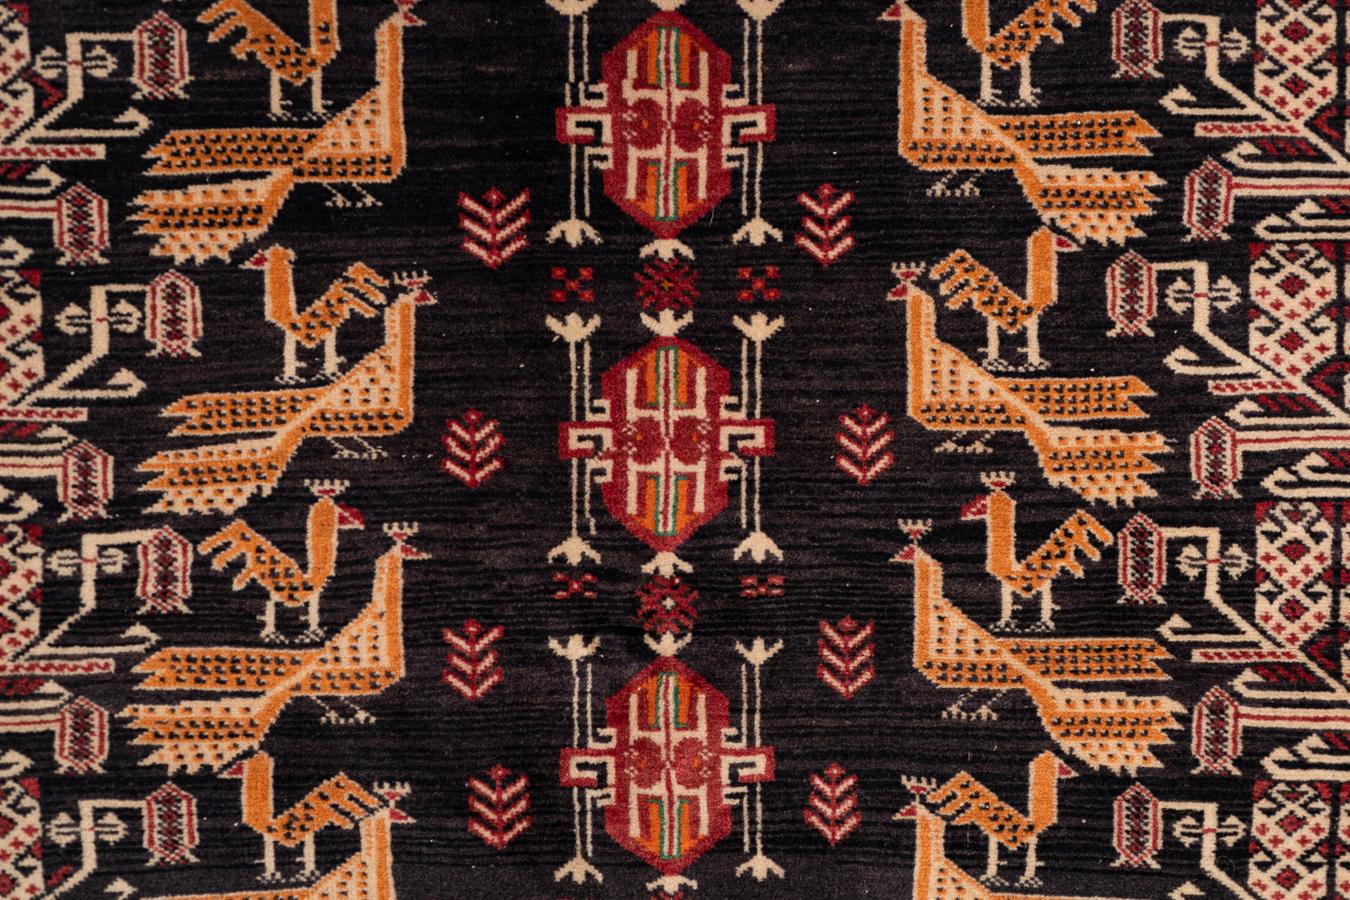 Baluch Rug For Sale